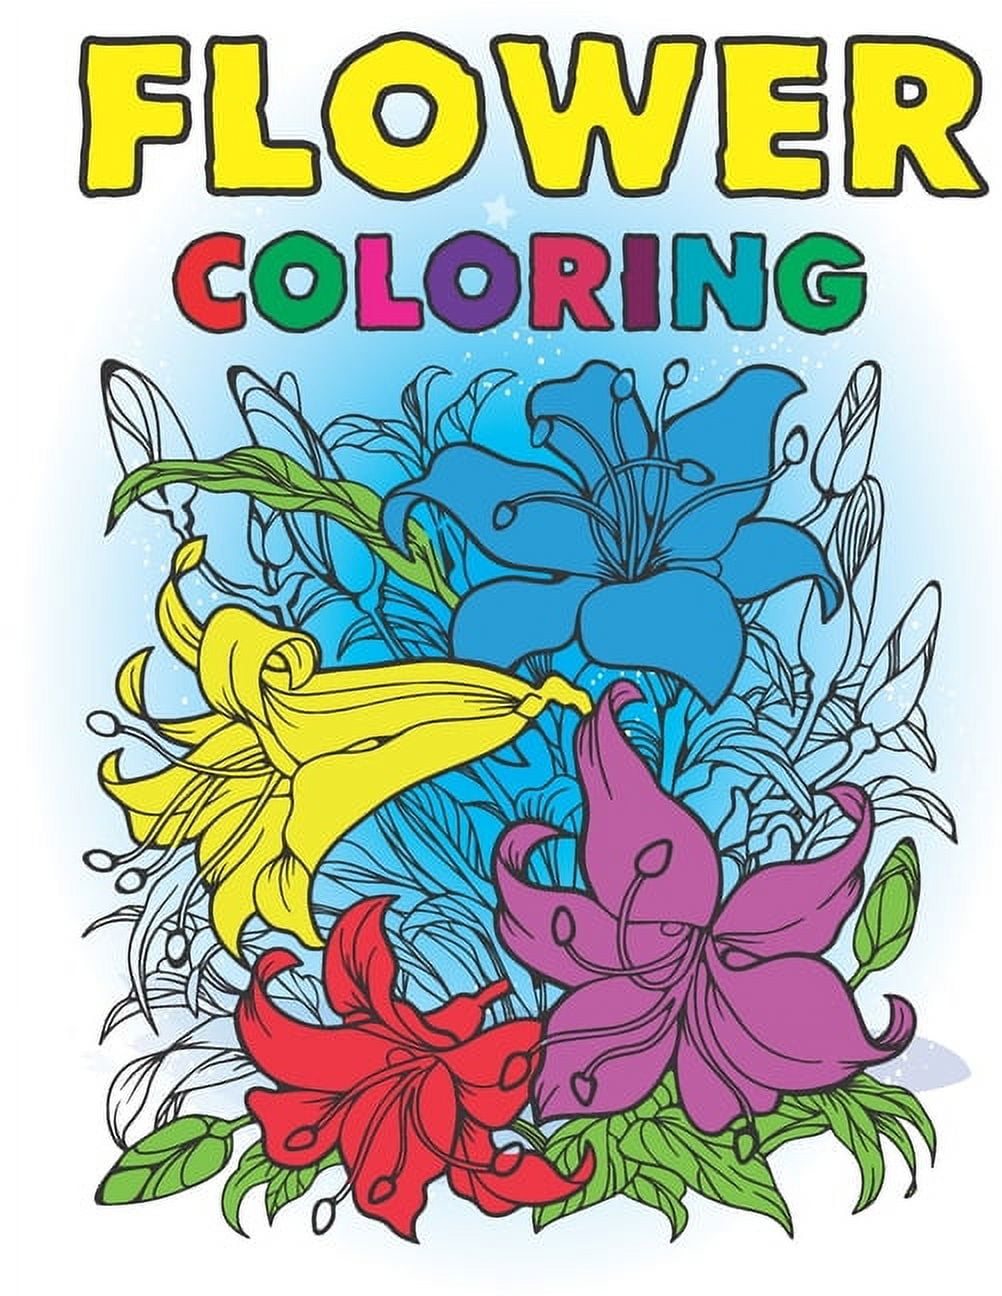 Flower coloring an adult coloring book with beautiful spring flowers fun flower designs and easy floral patterns coloring pages for relaxation paperback